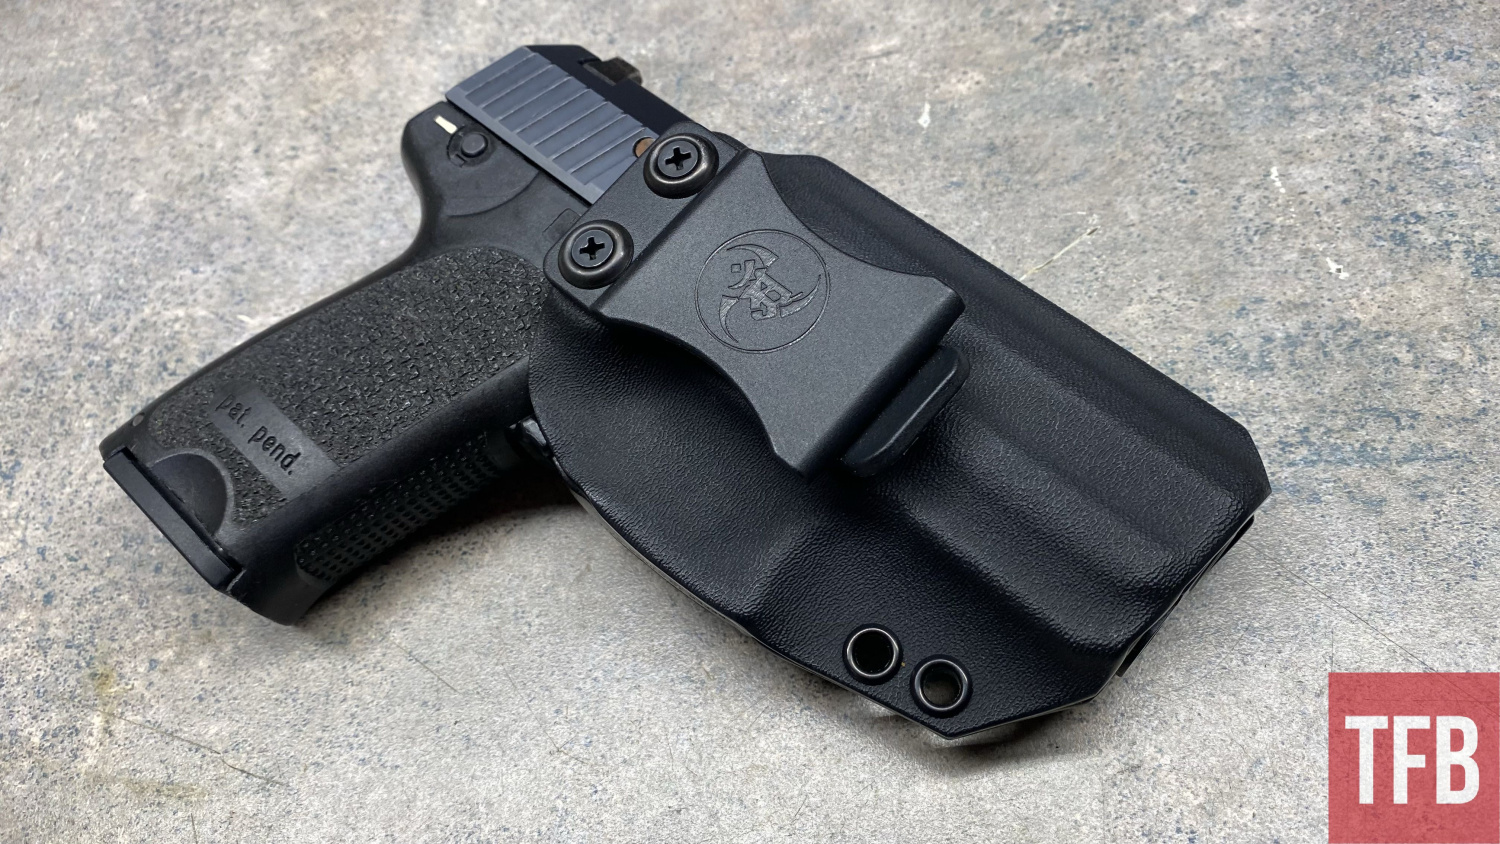 Concealed Carry Corner: Carrying In Questionable Places